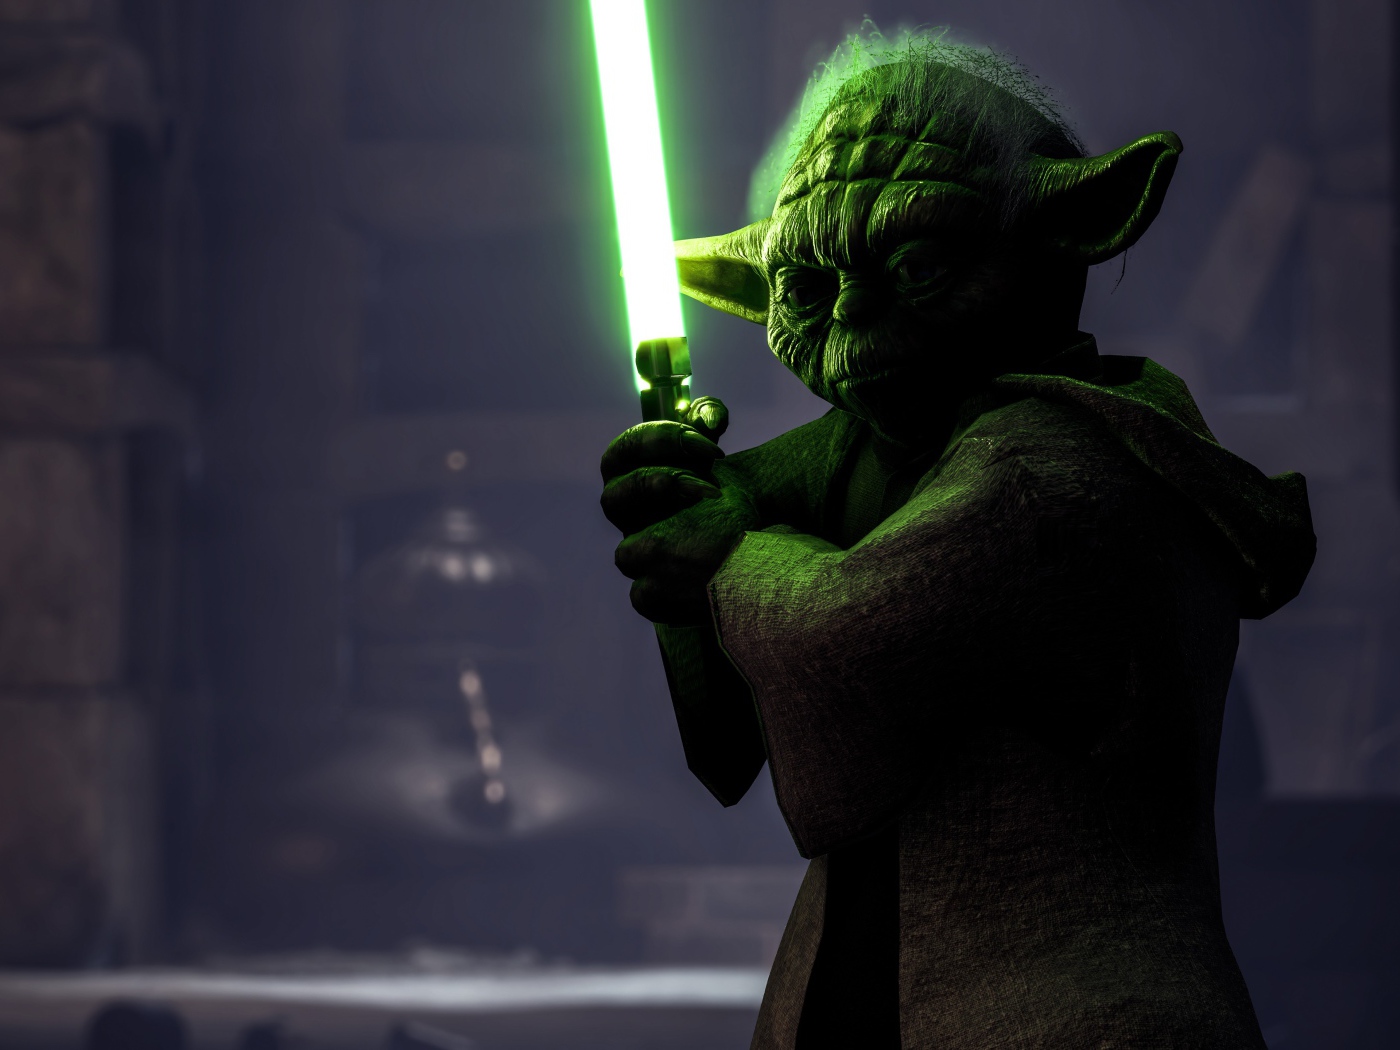 Master Yoda with a laser sword